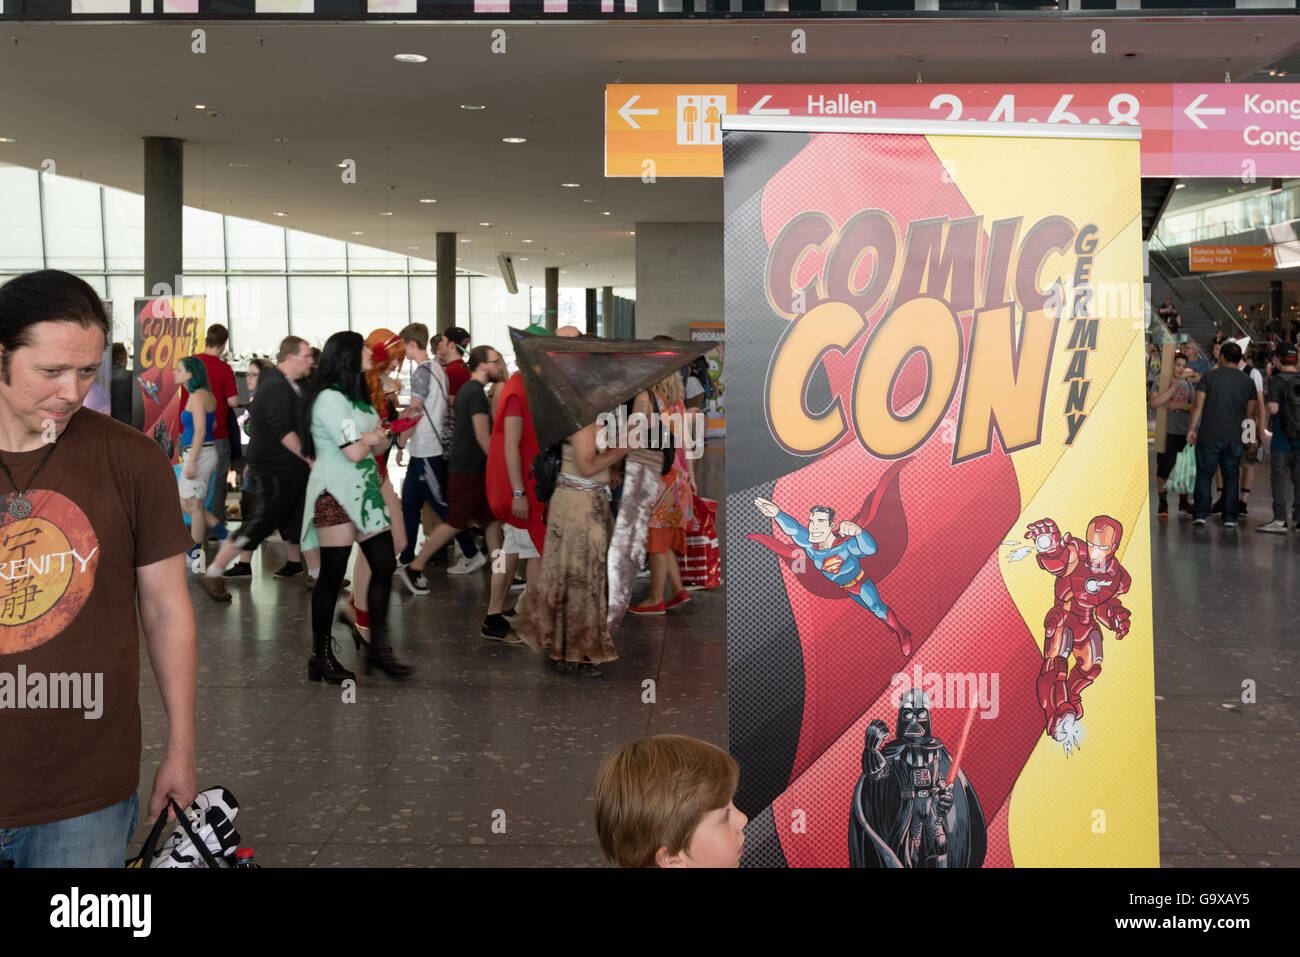 Stuttgart, Germany - June 25, 2016: Visitors, some of them dressed as cosplayers, in the entrance of the Comic Con Germany event Stock Photo